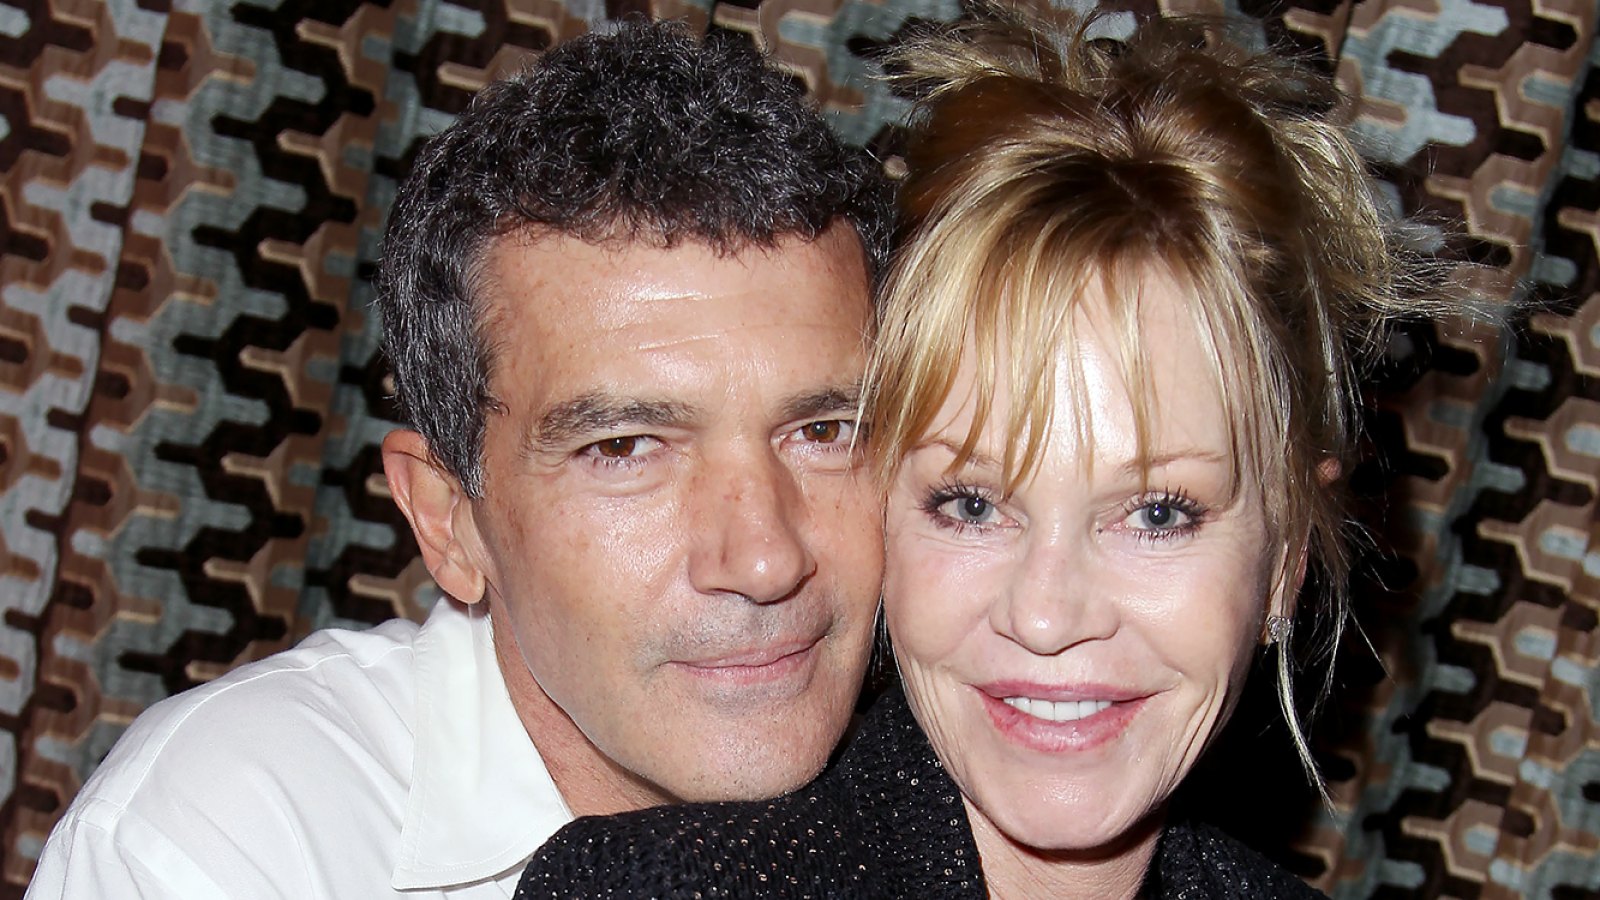 Melanie Griffith Shares a Series of Intimate Photos With Her Ex-Husbands Over the Years